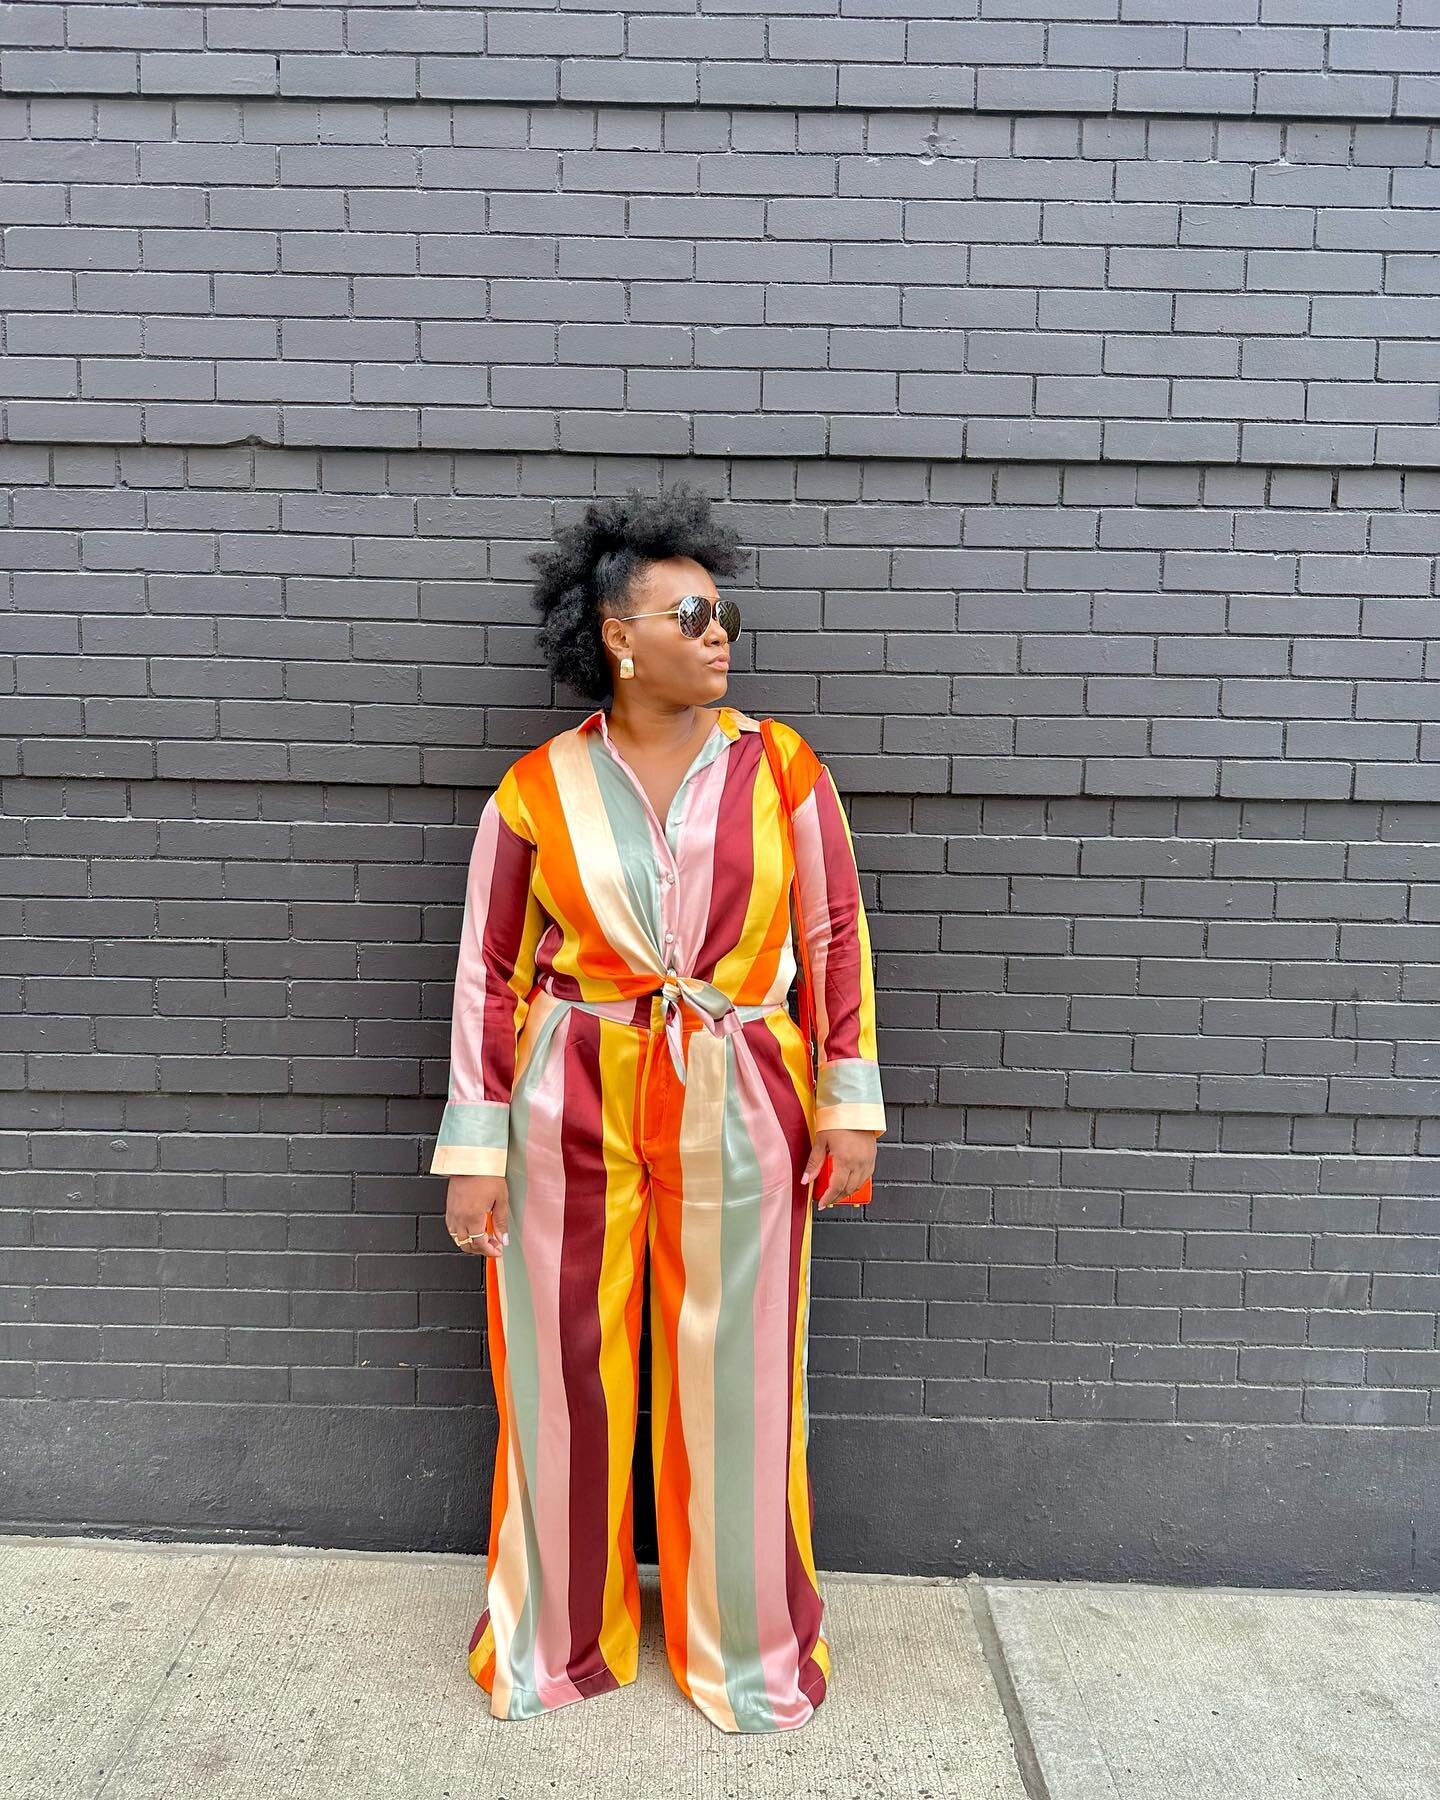 80 degrees in NYC and couldn&rsquo;t help but to throw on this stunning FeNoel x Target set. ⁣I felt cute 😎⁣
⁣⁣
And of course, TAO (Downtown)😅⁣⁣
⁣⁣
Happy Saturday ! ⁣⁣
⁣⁣
#blacklifestyleblogger #nyclifestyleblogger #blackcontentcreator  #nyccreator